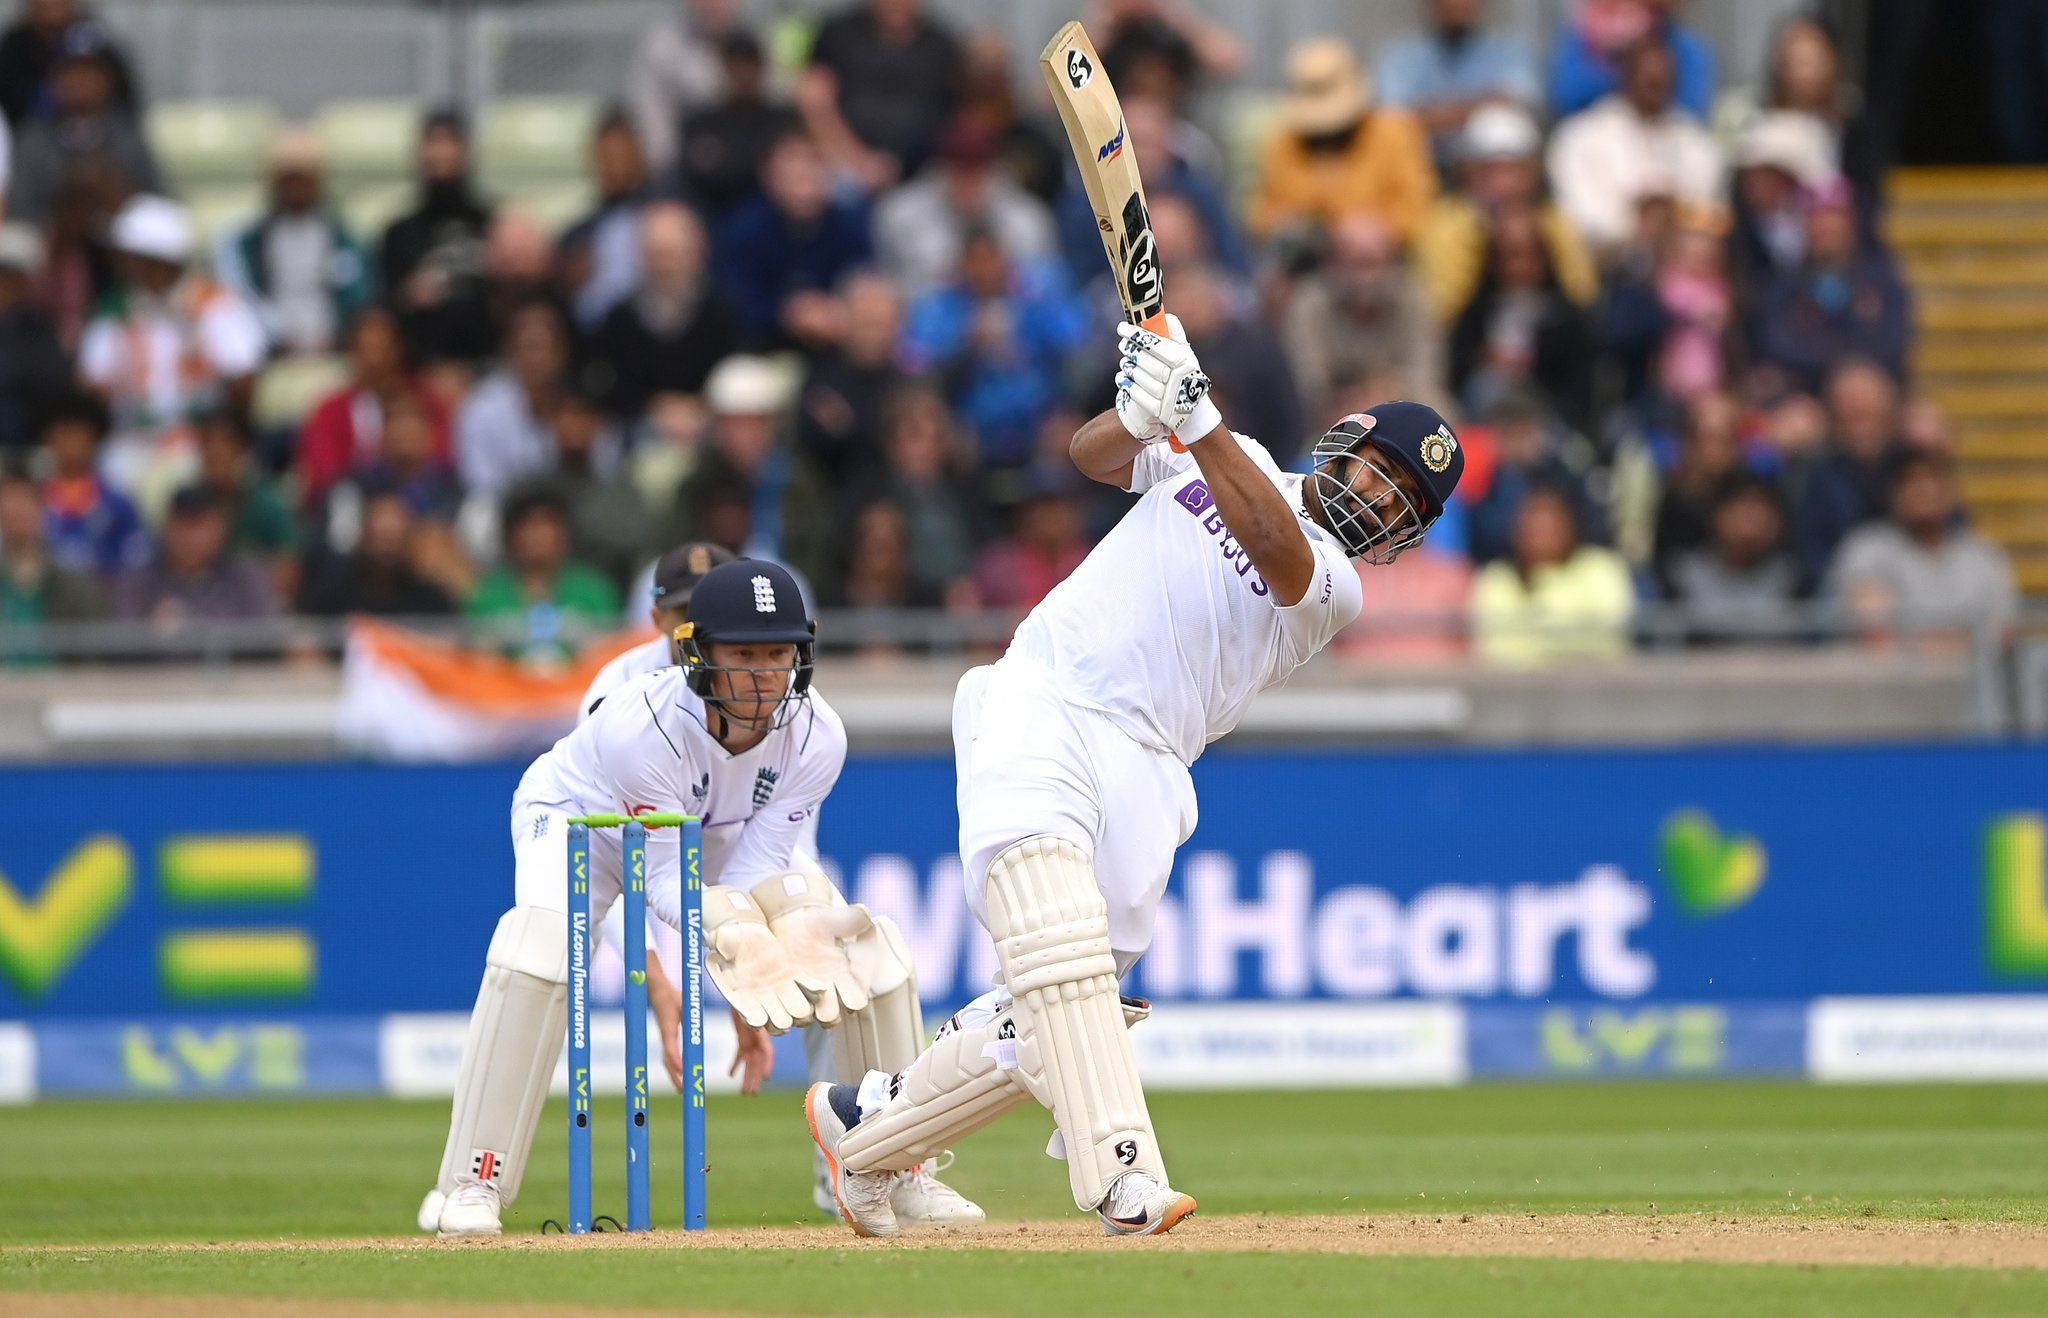 Pant, at 24, breaks massive Test records during 100-run knock vs England